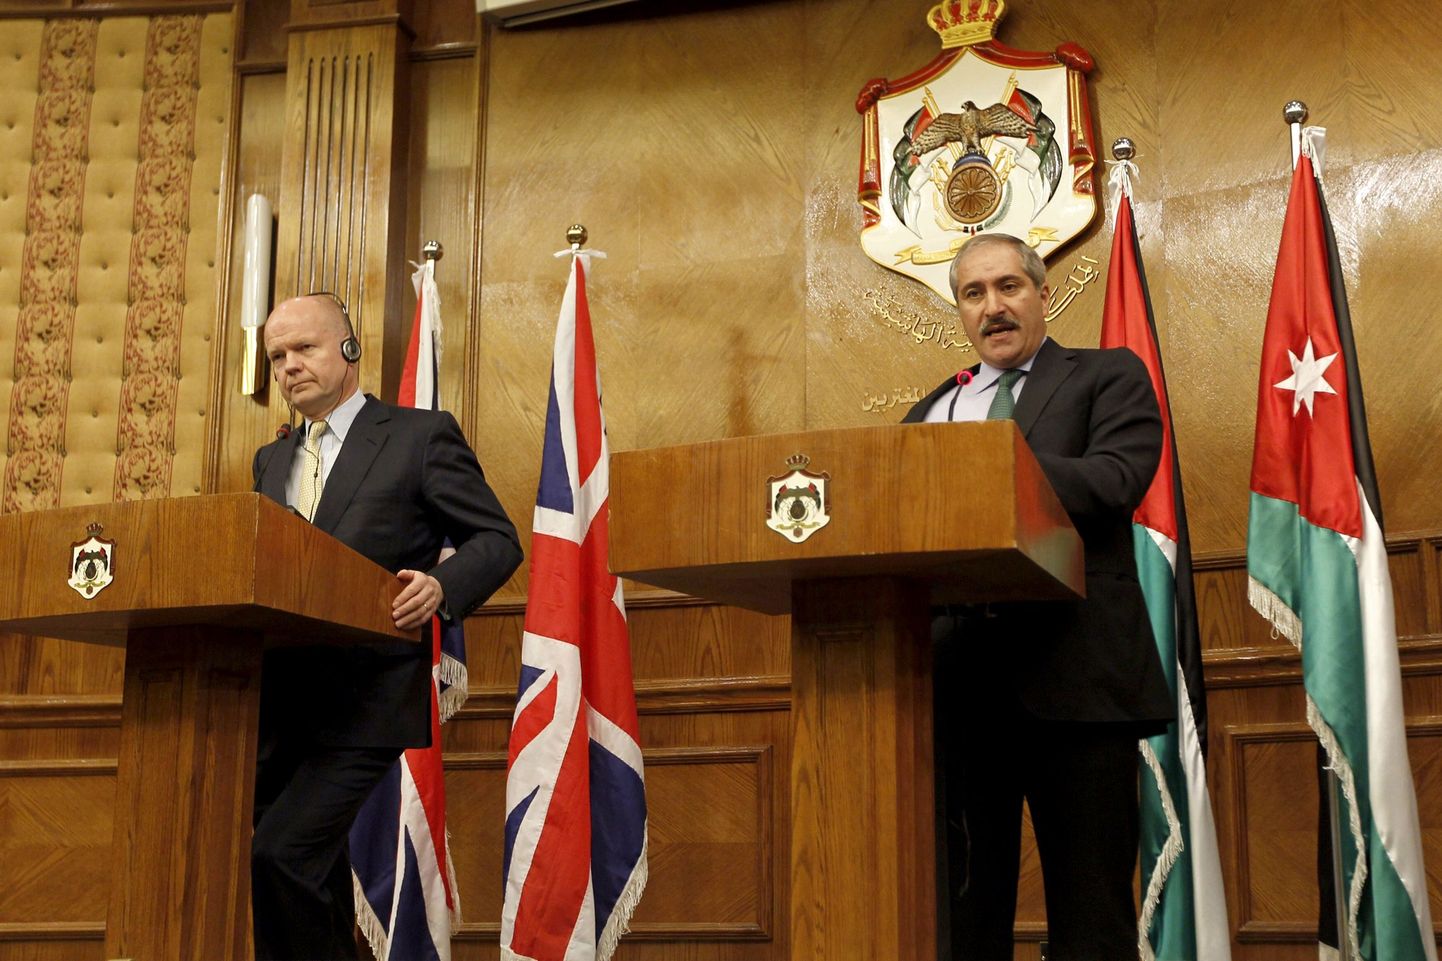 Jordanian Foreign Minister Nasser Judeh, right, and British Foreign Secretary William Hague speak during their joint news conference in Amman, Jordan, Wednesday, May 22, 2013. Jordan is hosting 10 other nations Wednesday for a "Friends of Syria" conference in Amman. U.S. Secretary of State John Kerry is taking part, along with officials from Turkey, Saudi Arabia, the United Arab Emirates, Qatar, Egypt, Britain, France, Germany and Italy. The meeting will prepare for U.N.-hosted international talks on Syria planned for next month.(AP Photo) / SCANPIX Code: 436